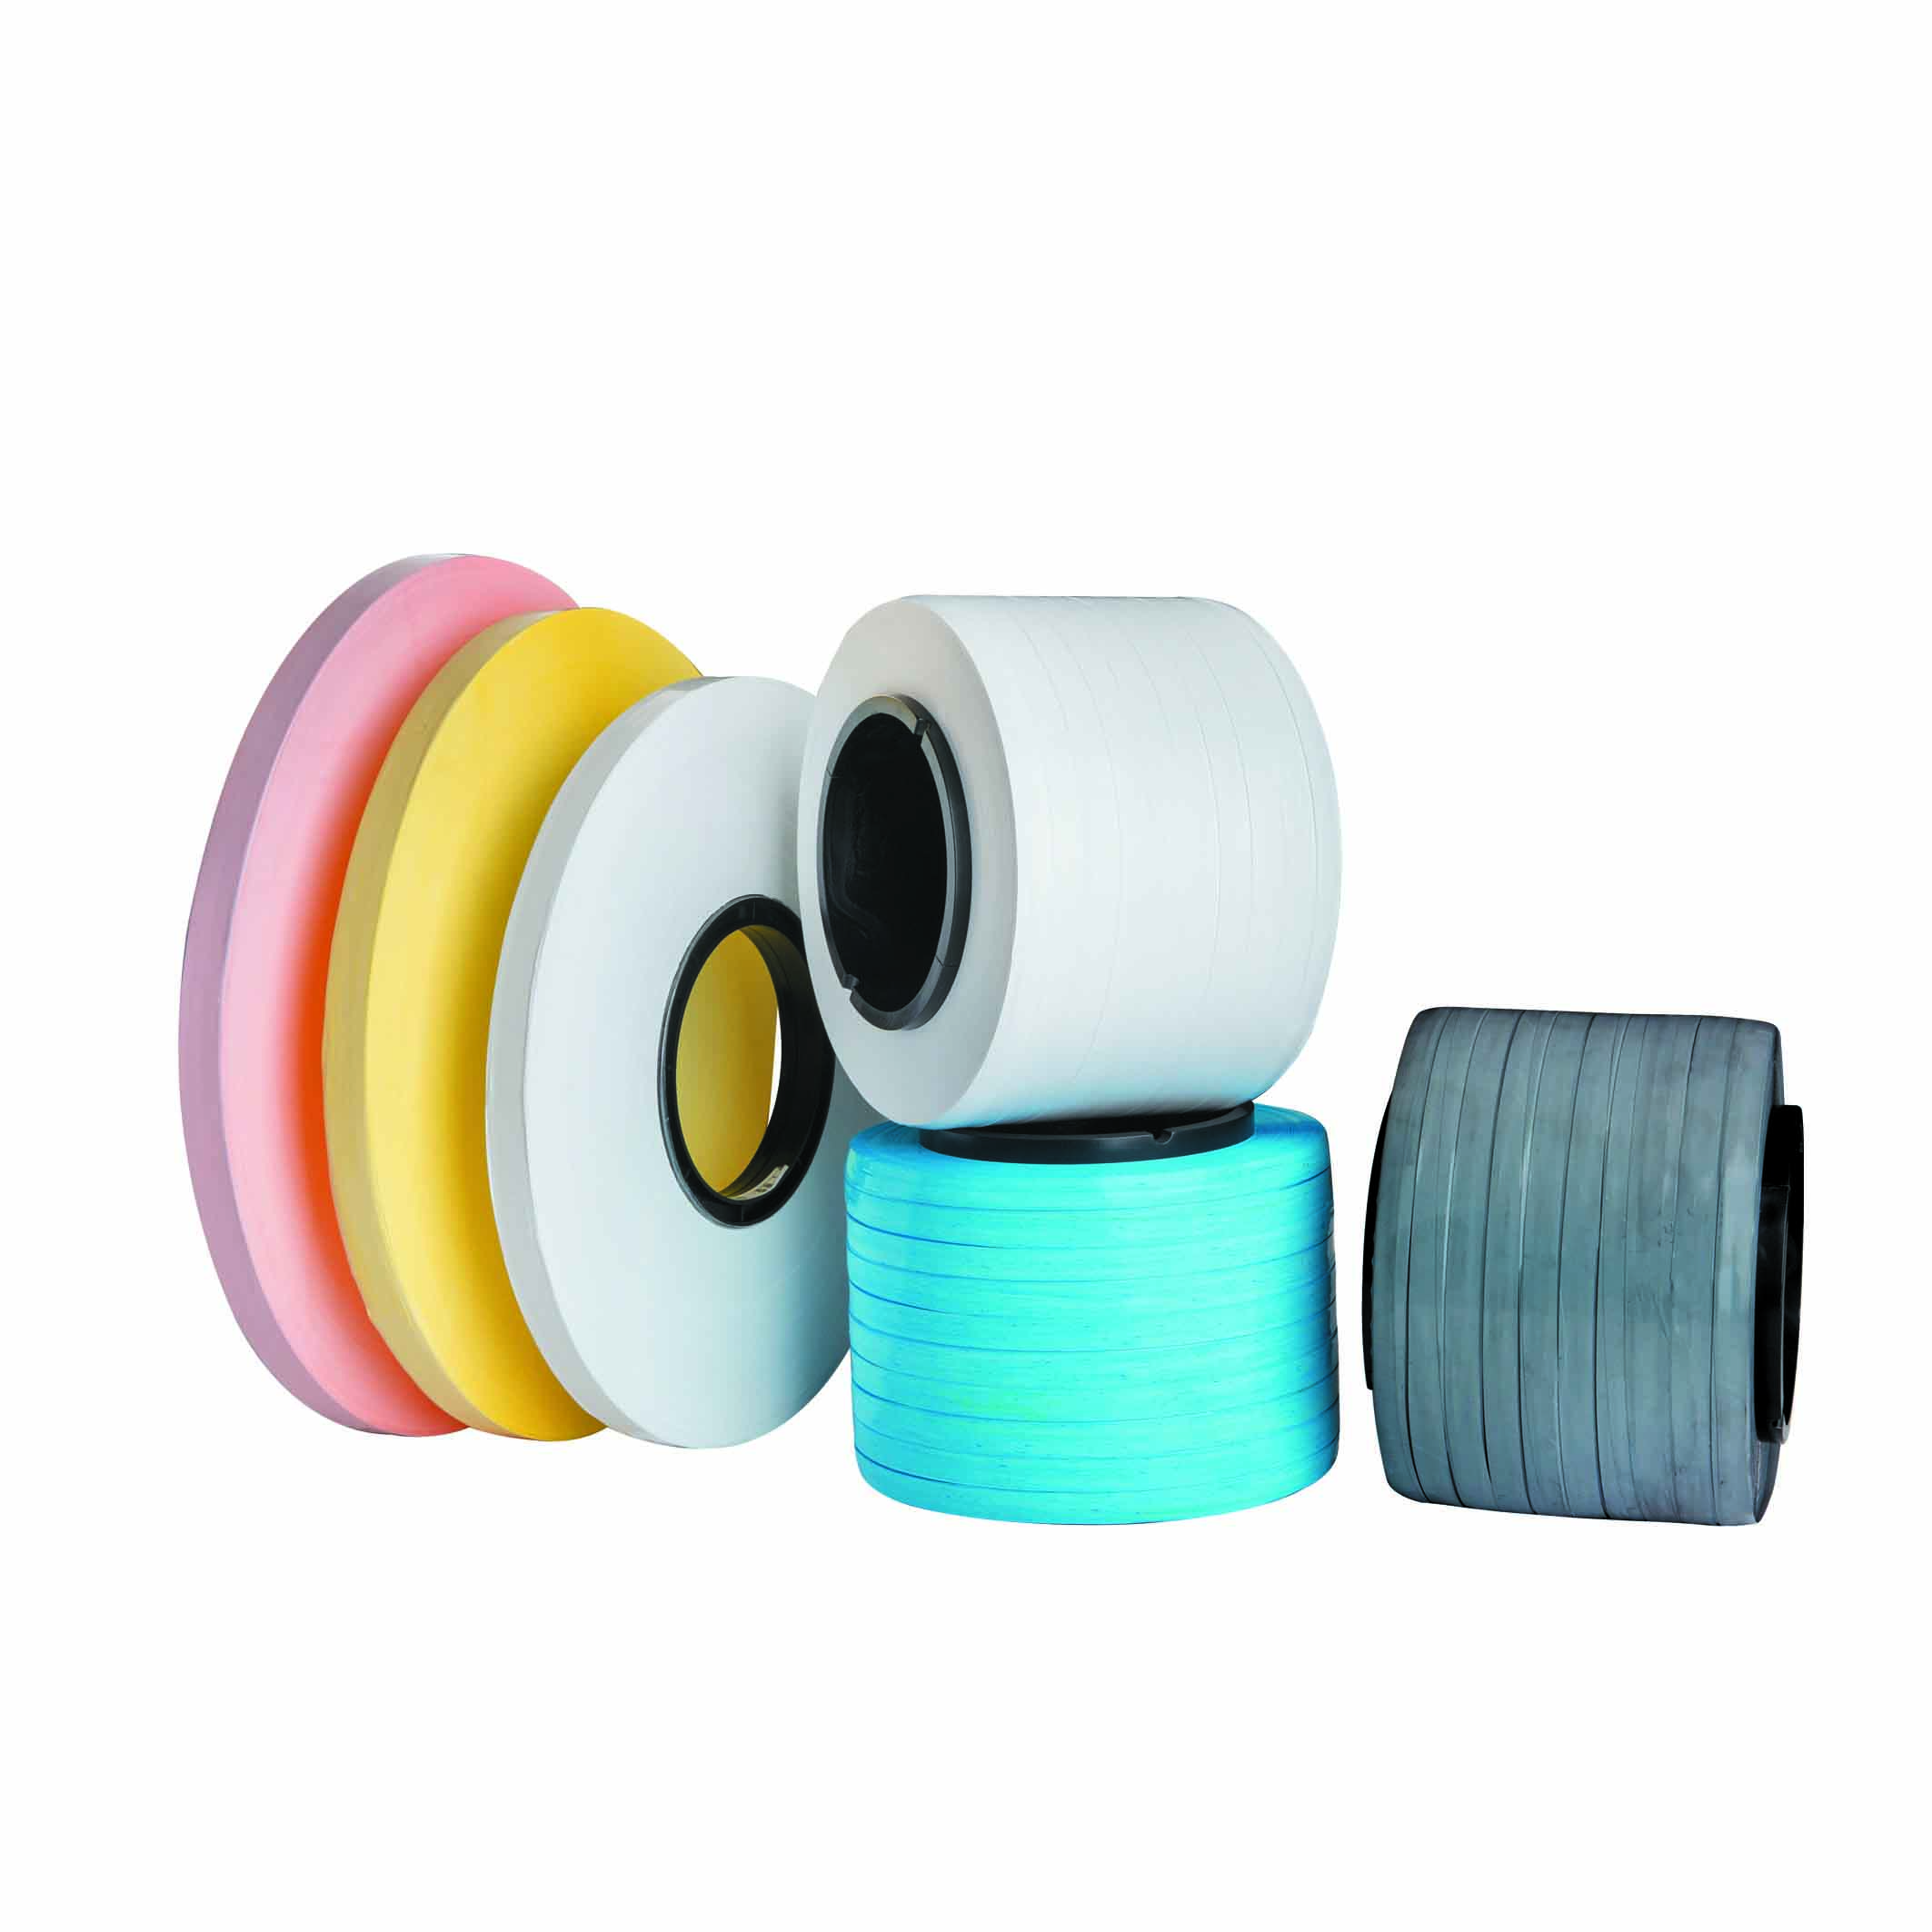 HIGH DENSITY UNSINTERED PTFE TAPE FOR HIGH TEMPERATURE RESISTANCE WIRES AND CABLES